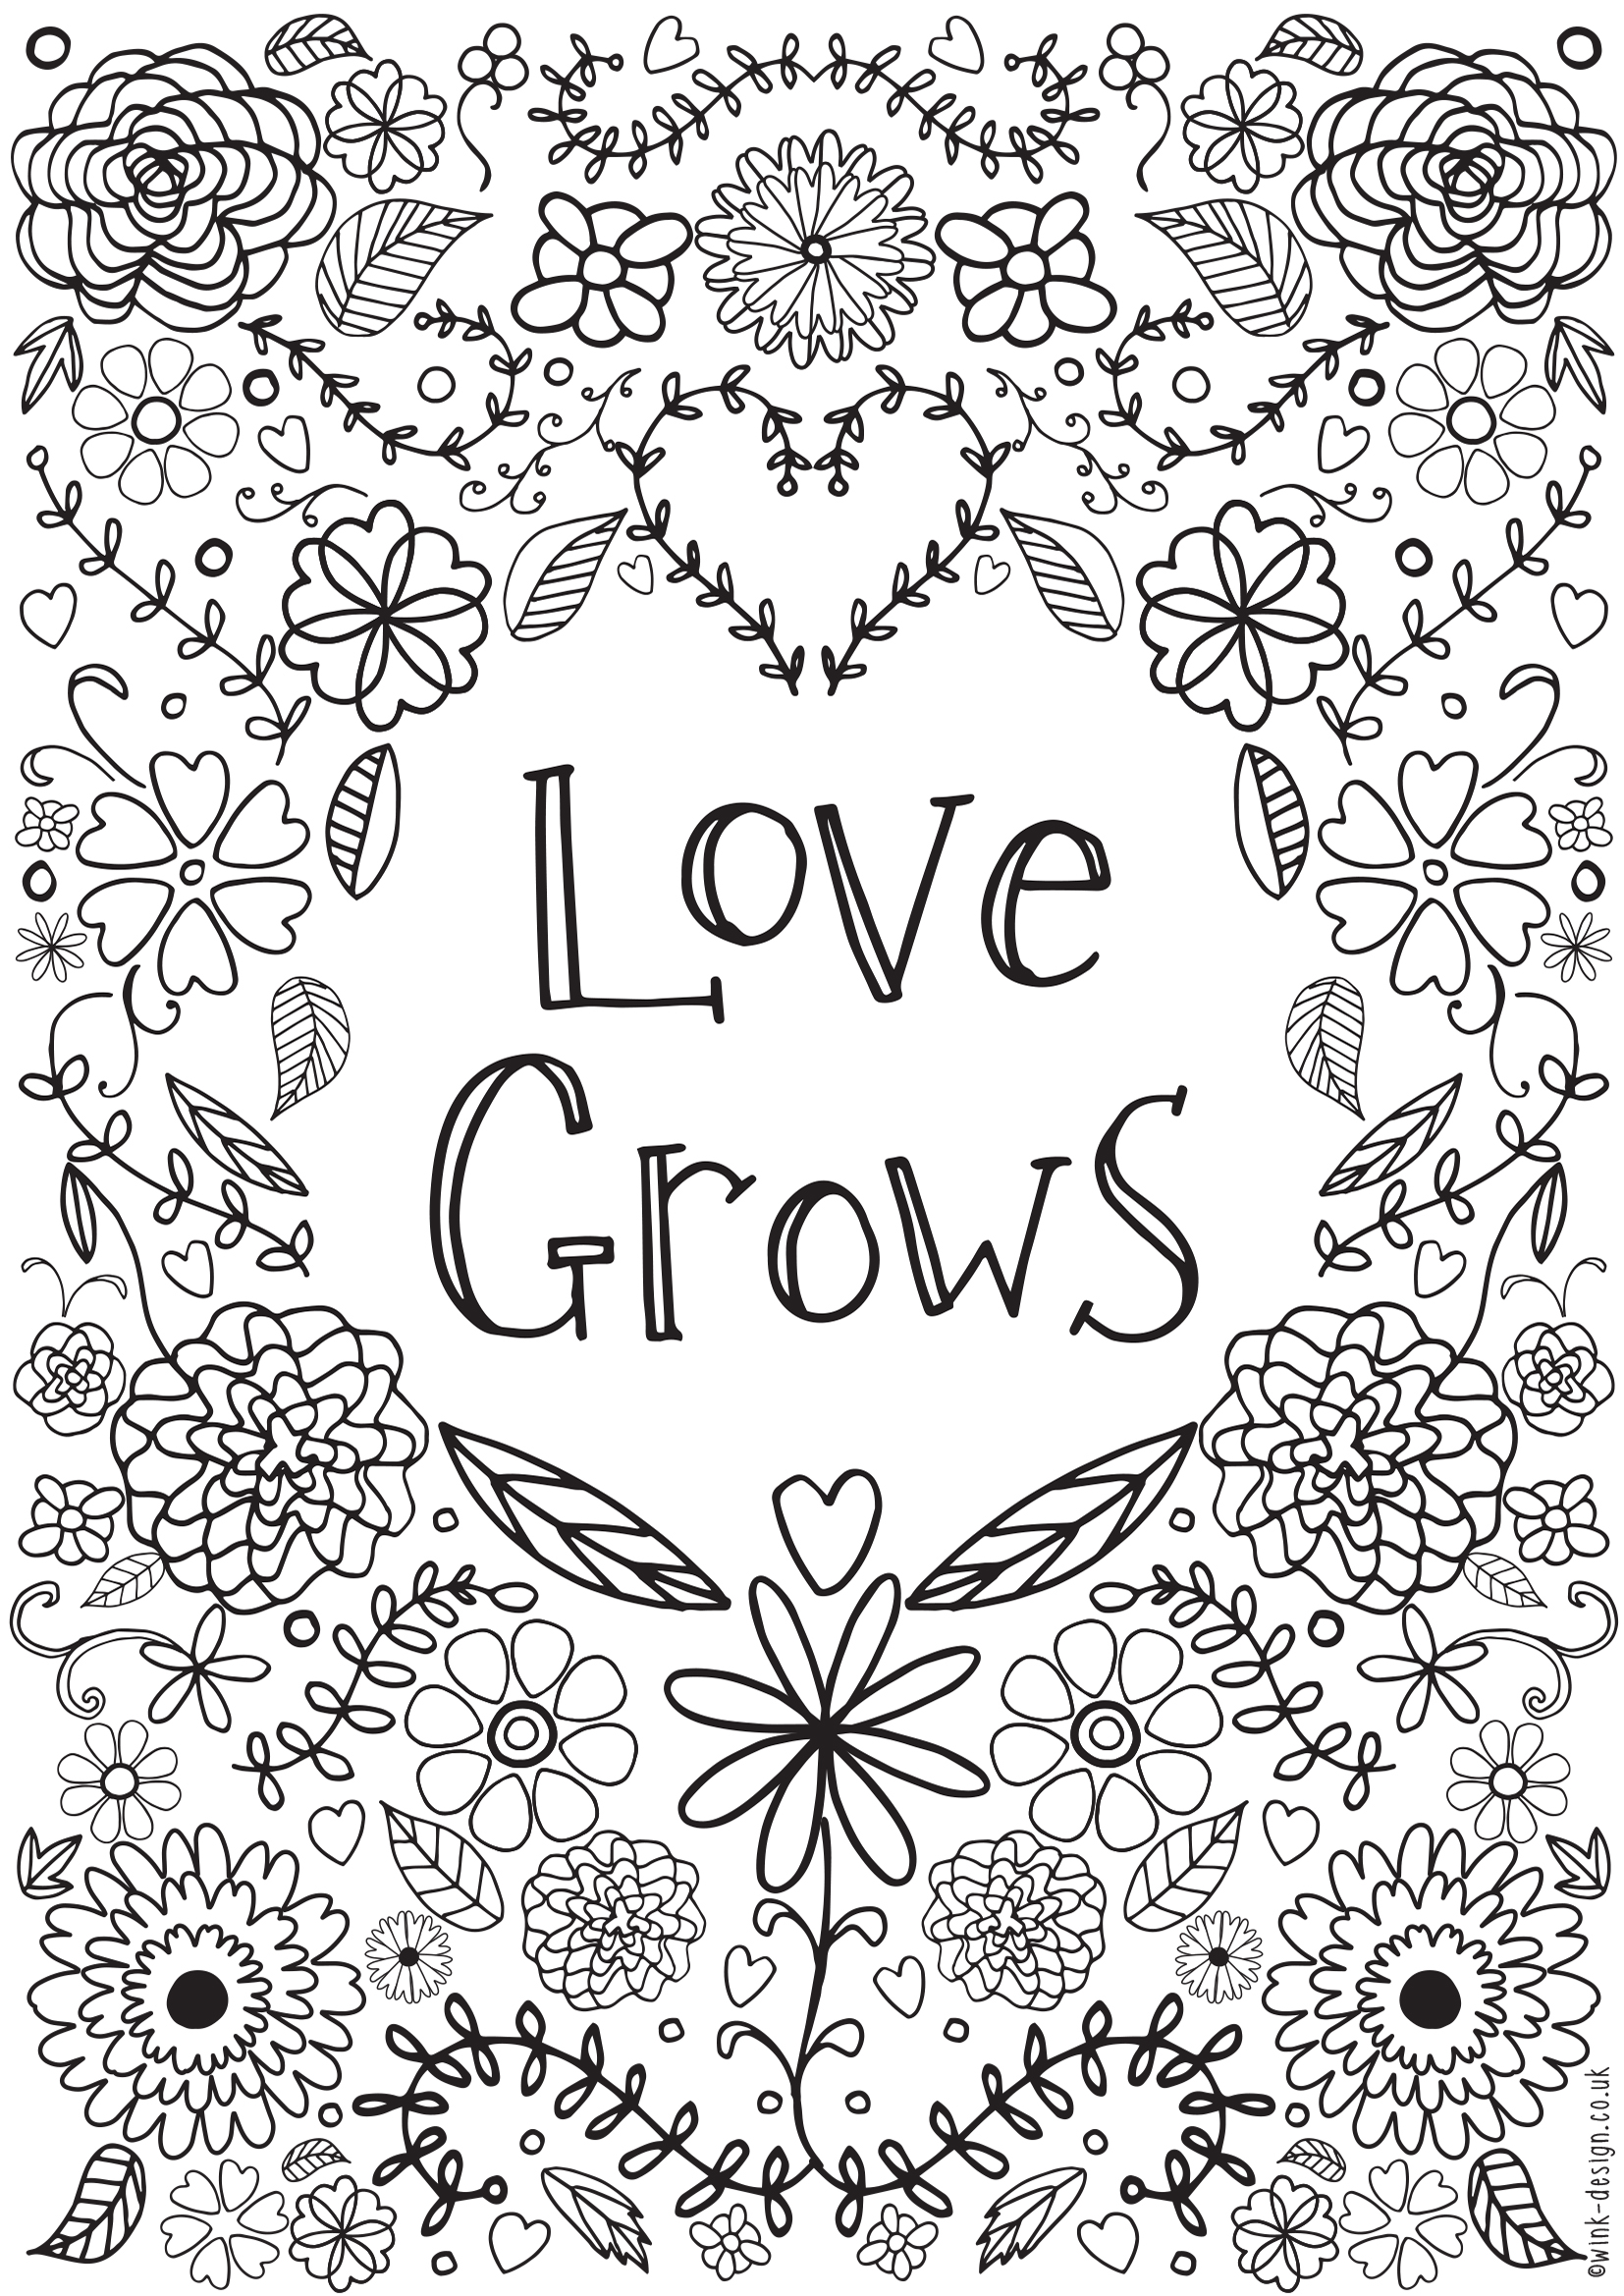 Free Adult Floral Coloring Page! - The Graphics Fairy